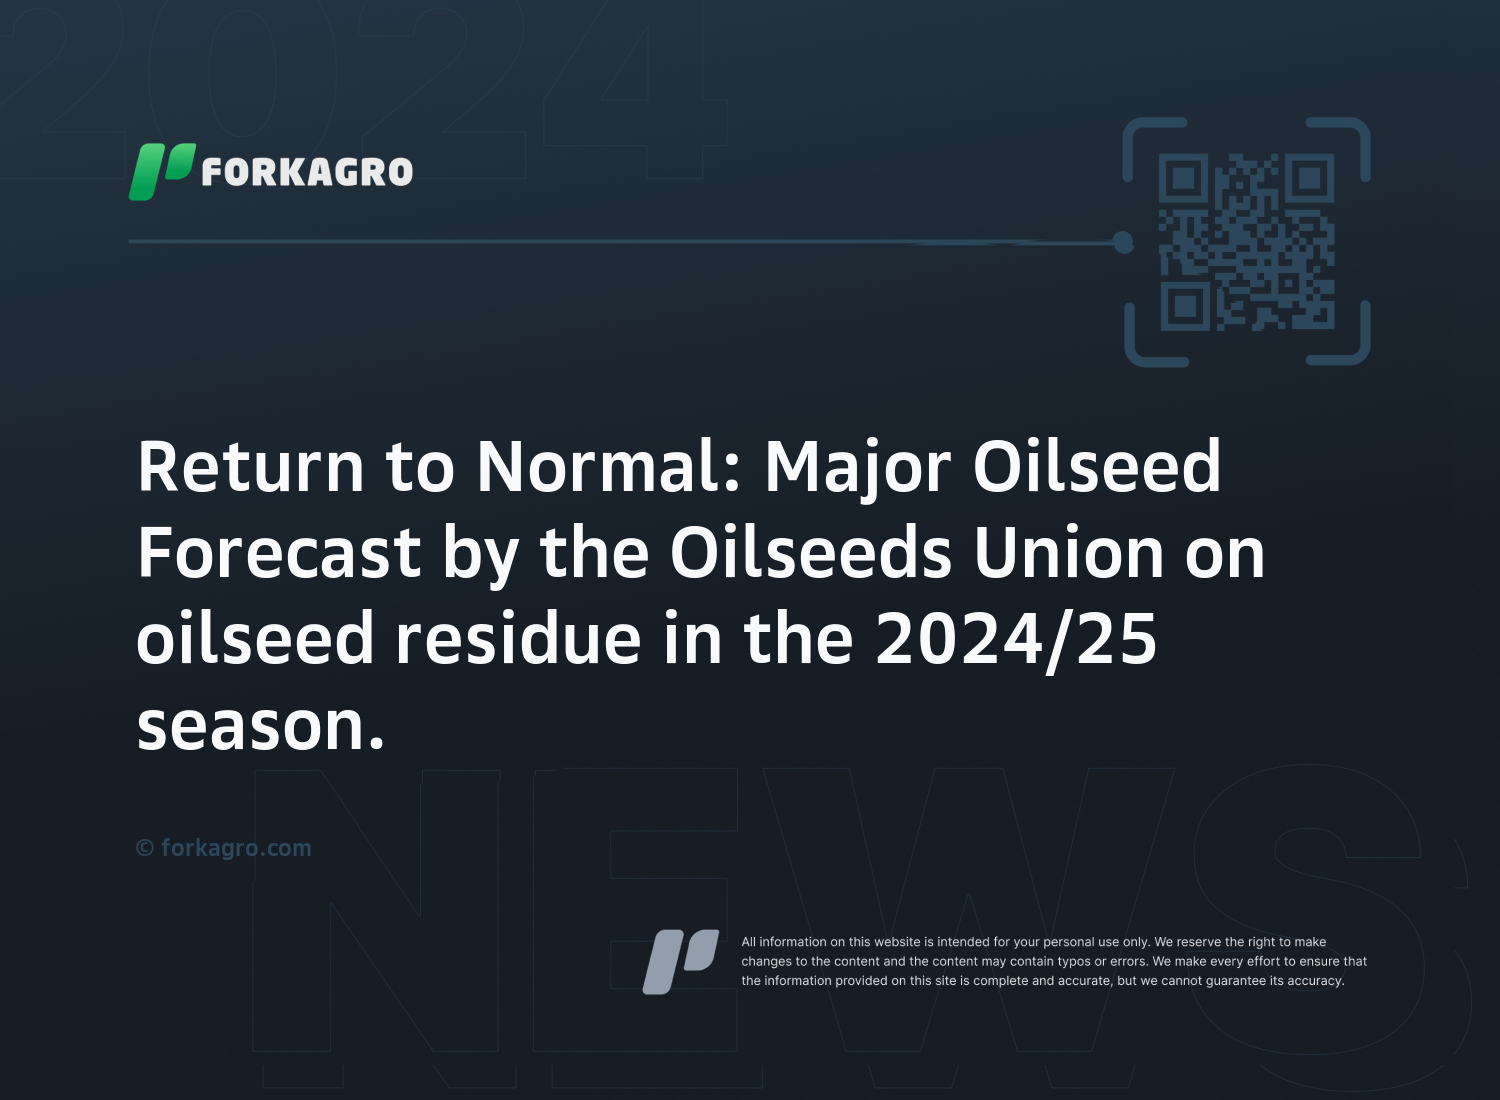 Return to Normal: Major Oilseed Forecast by the Oilseeds Union on oilseed residue in the 2024/25 season.